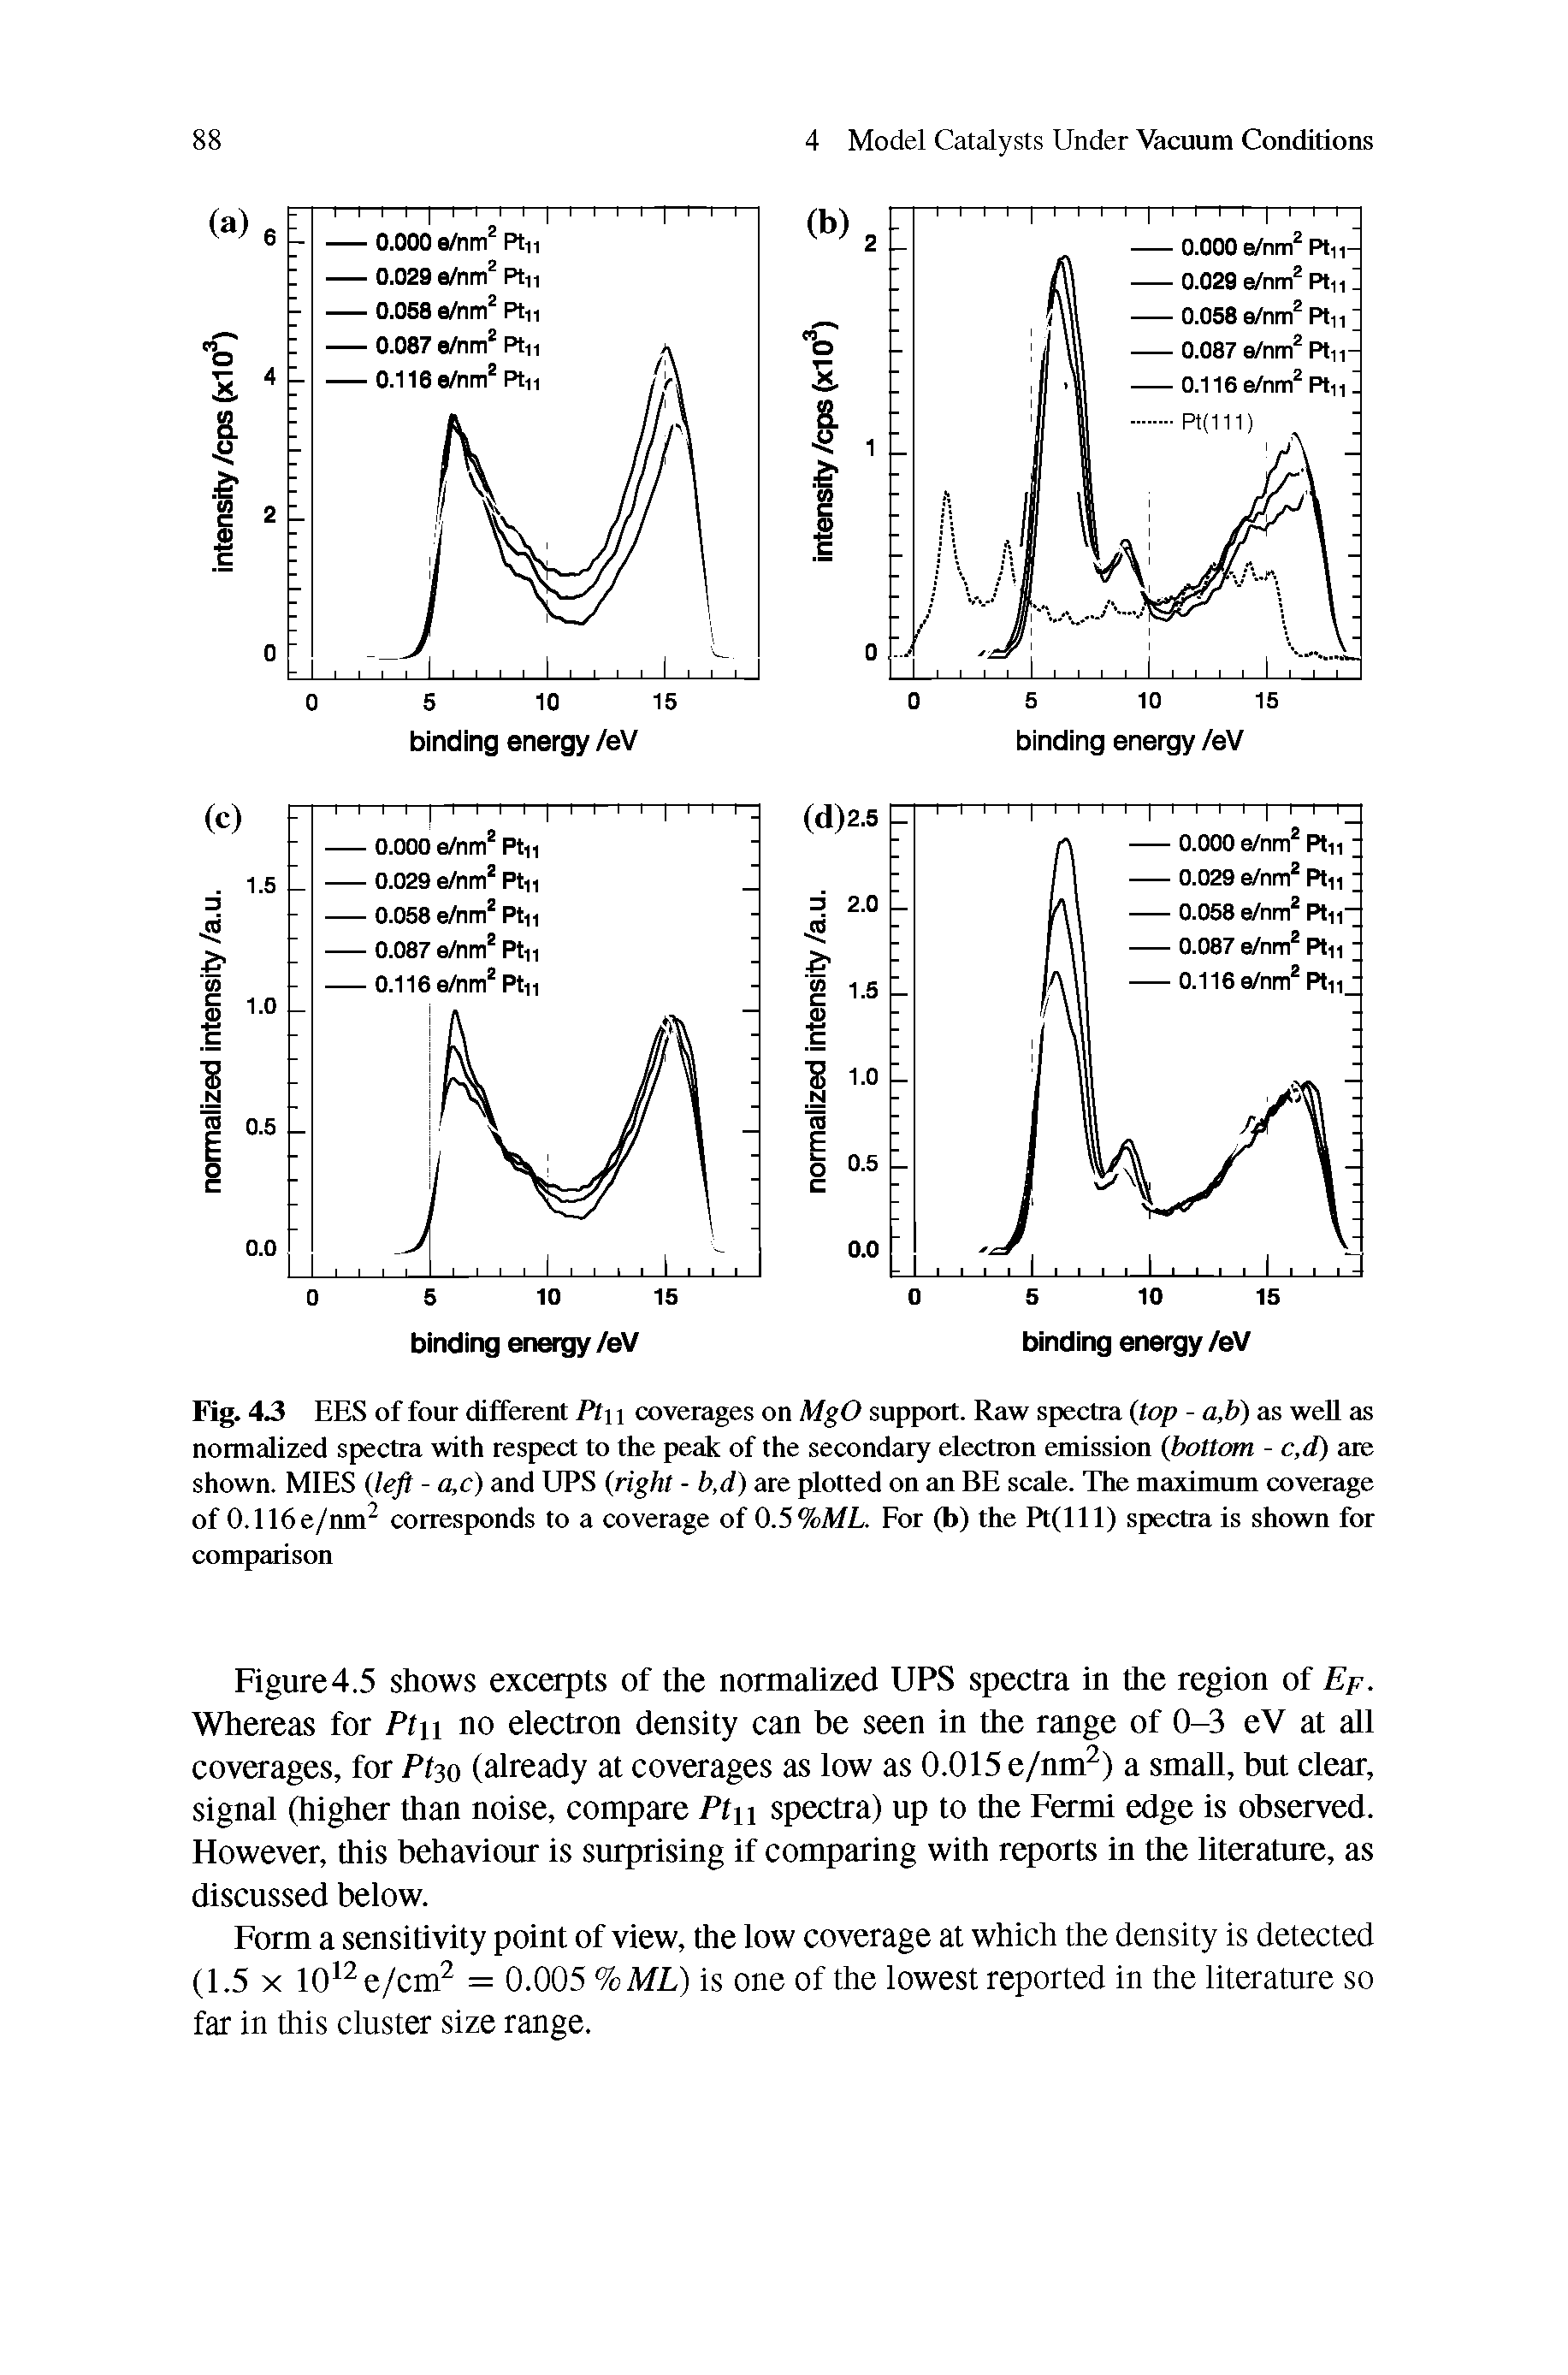 Figure4.5 shows excerpts of the normaUzed UPS spectra in the region of Ep. Whereas for Pt no electron density can be seen in the range of 0-3 eV at all coverages, for Ptzo (already at coverages as low as 0.015 e/nm ) a small, but clear, signal (higher than noise, compare Pt spectra) up to the Fermi edge is observed. However, this behaviour is surprising if comparing with reports in the literature, as discussed below.